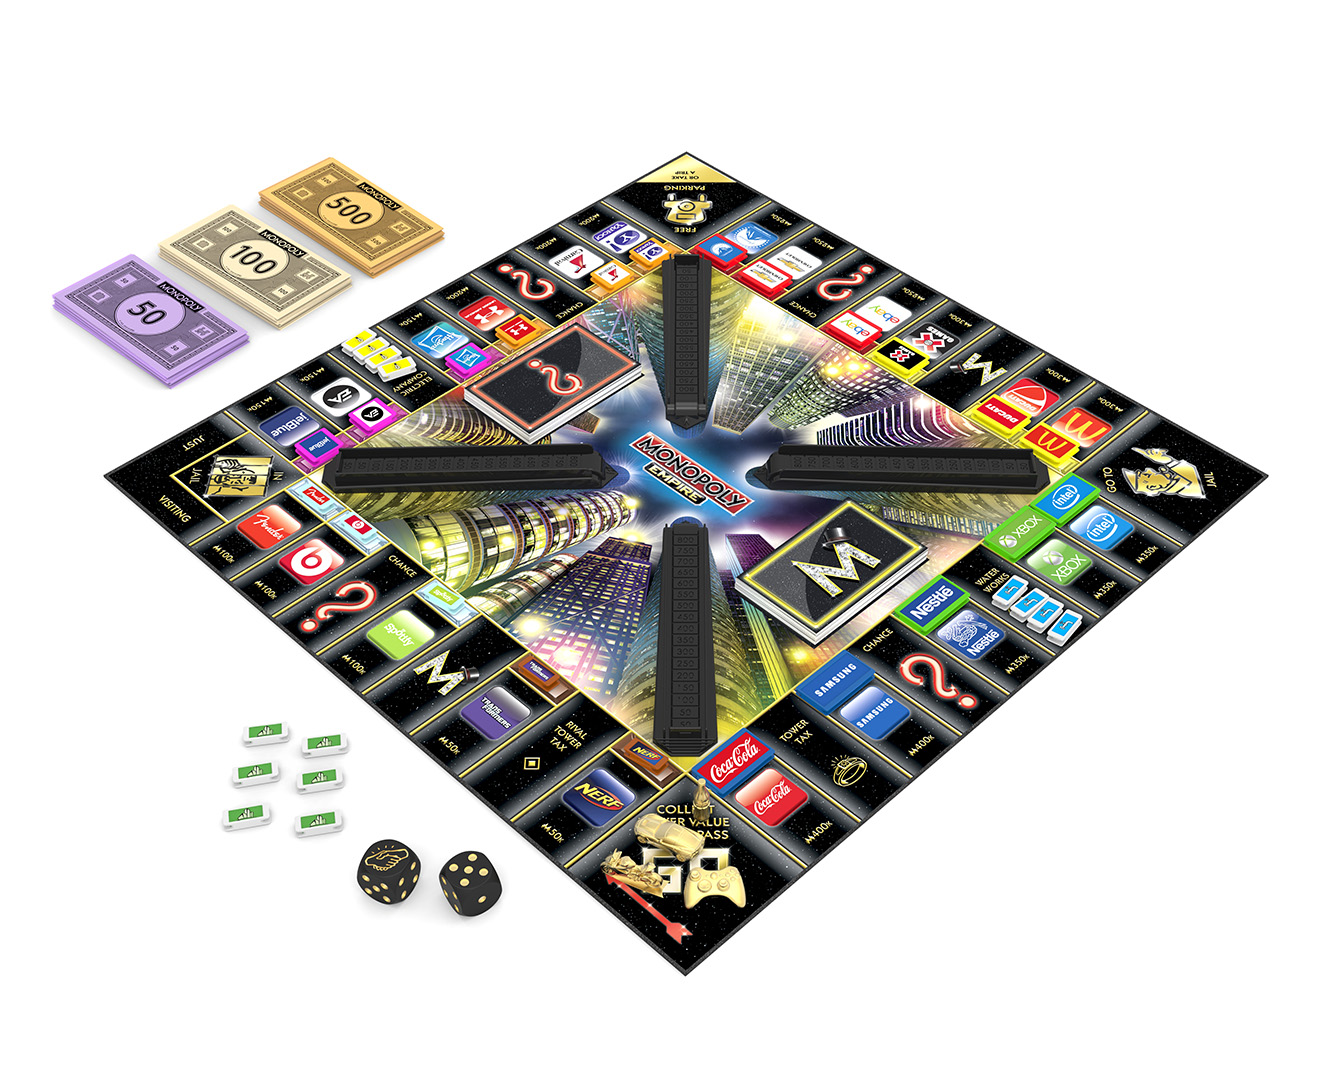 monopoly empire game online